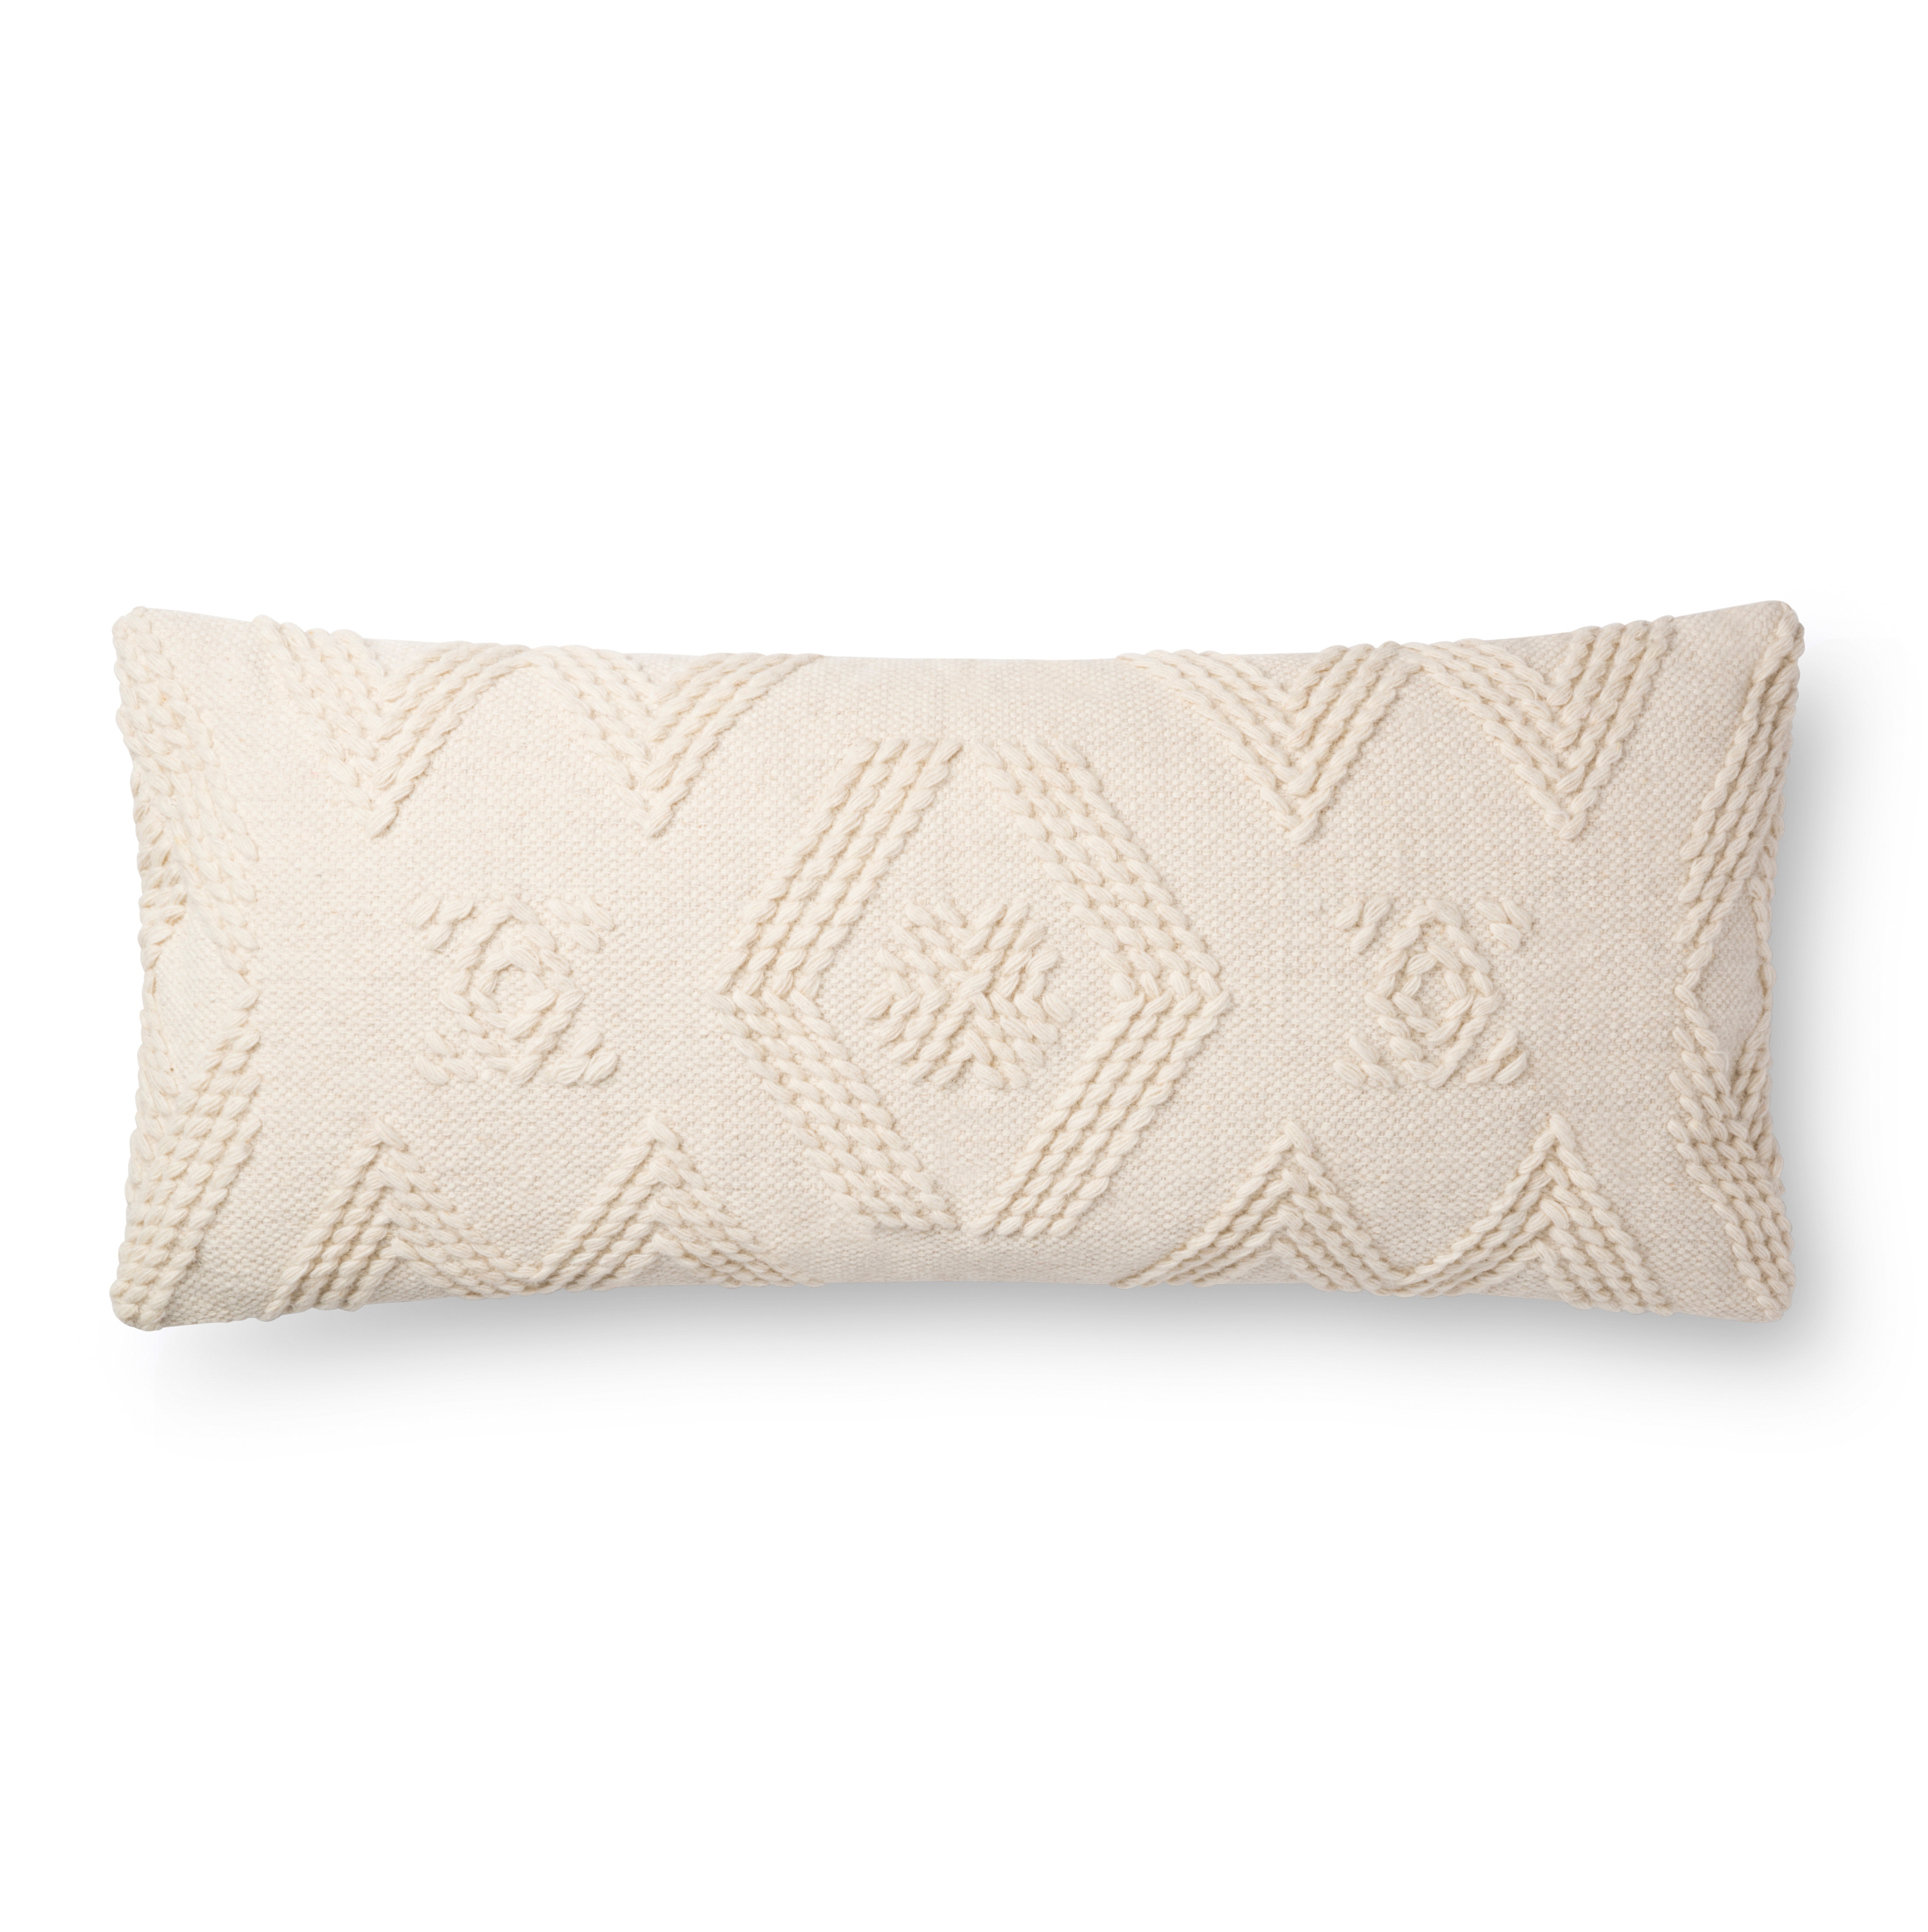 PILLOWS P1105 IVORY / IVORY 13" x 35" Cover w/Poly - Magnolia Home by Joana Gaines Crafted by Loloi Rugs